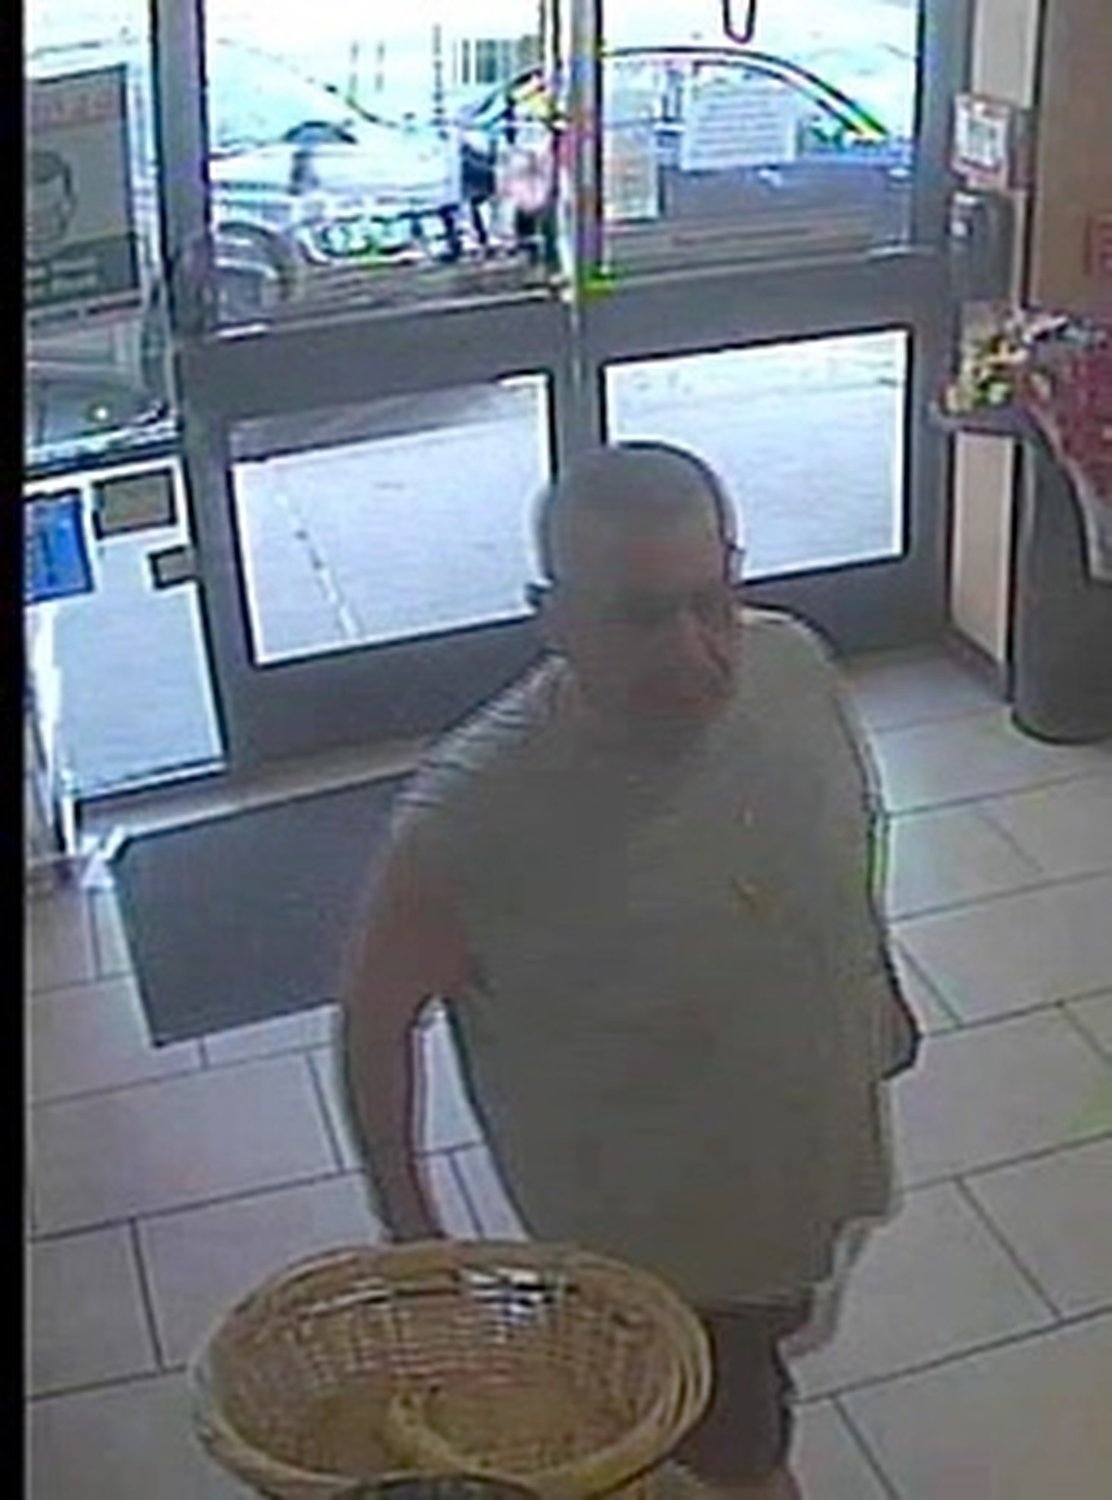 The man that allegedly robbed the 7-Eleven on Mill Road in Hewlett is described by police as white and in his 50s.